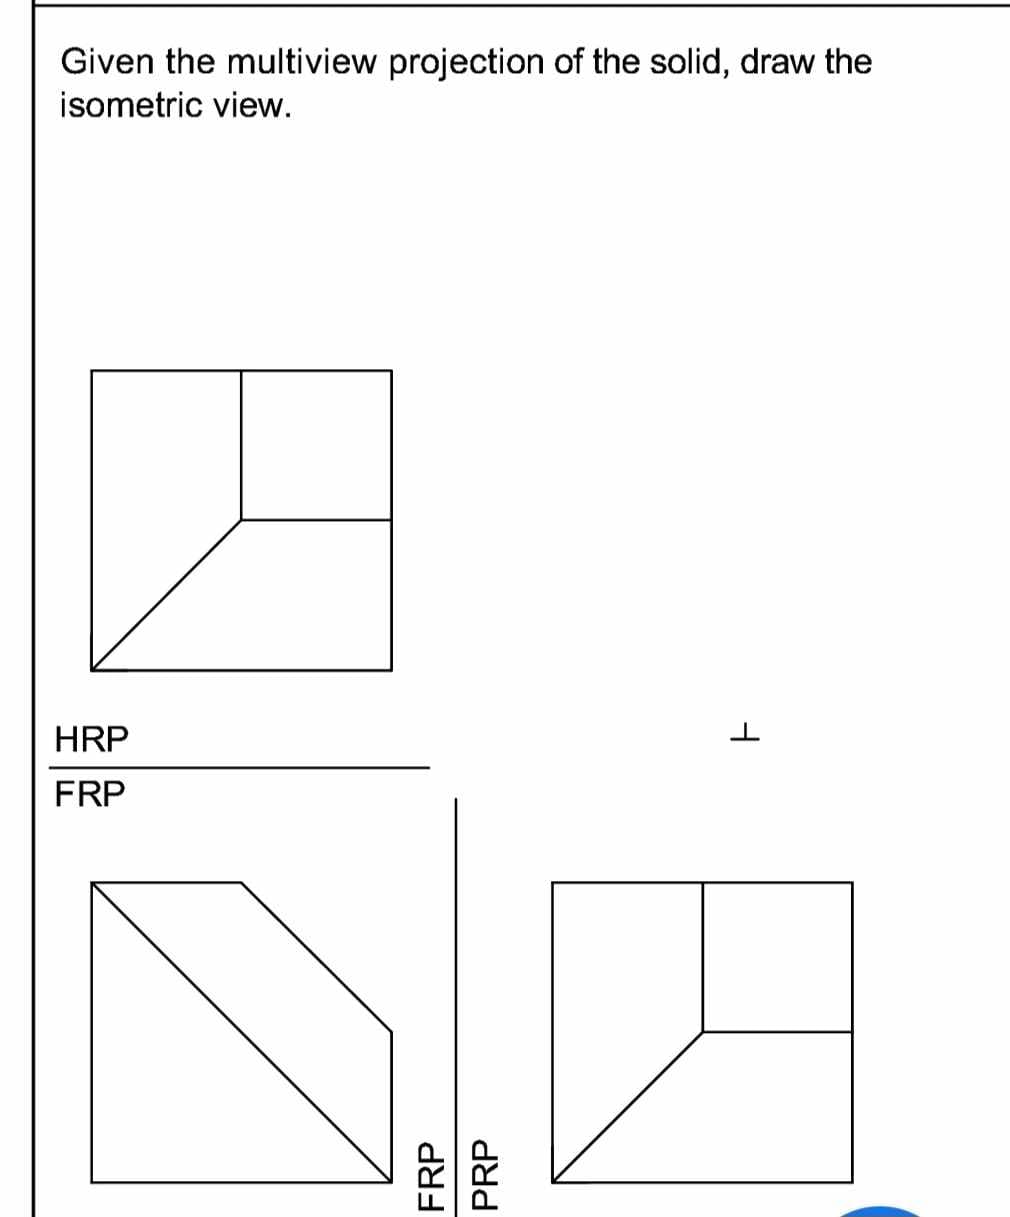 Given the multiview projection of the solid, draw the
isometric view.
HRP
FRP
FRP
PRP
1